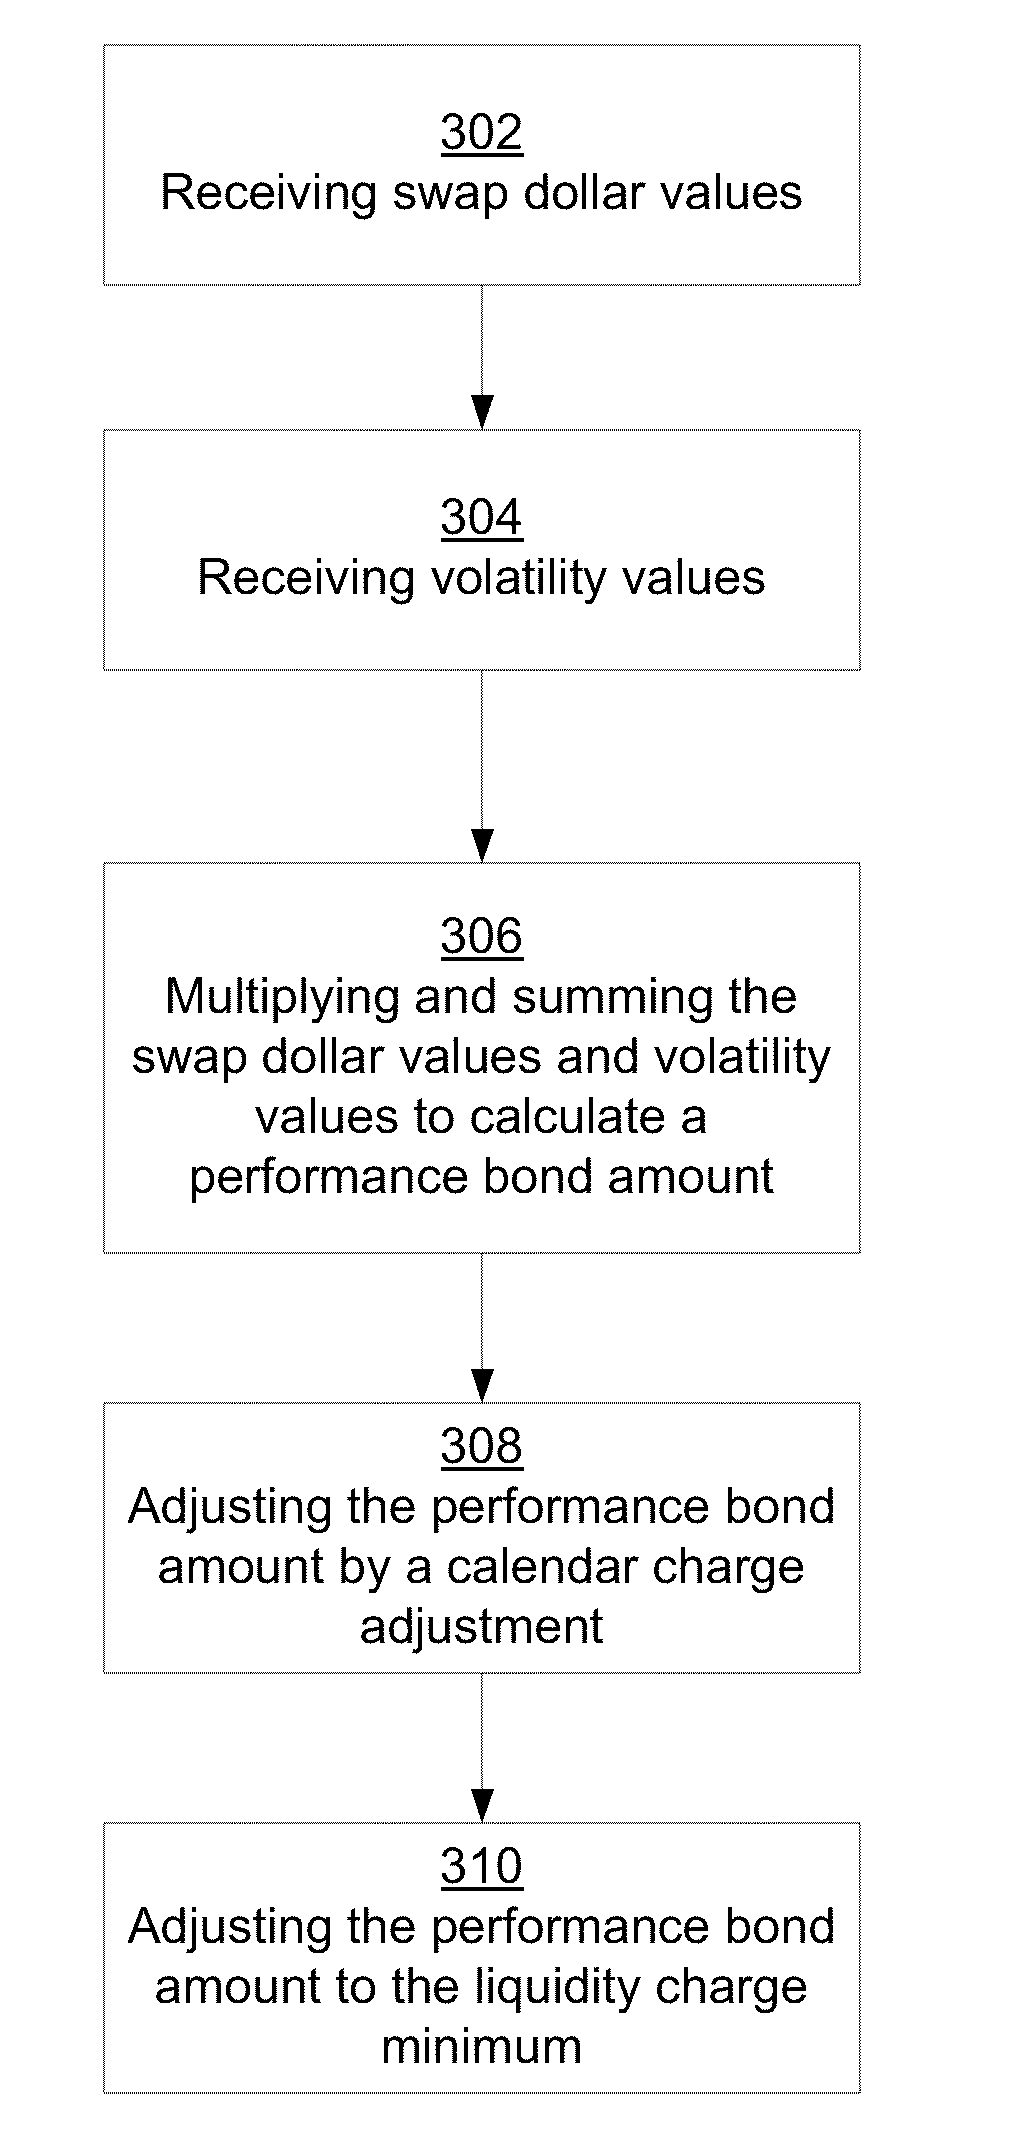 Clearing System That Determines Margin Requirements for Financial Portfolios